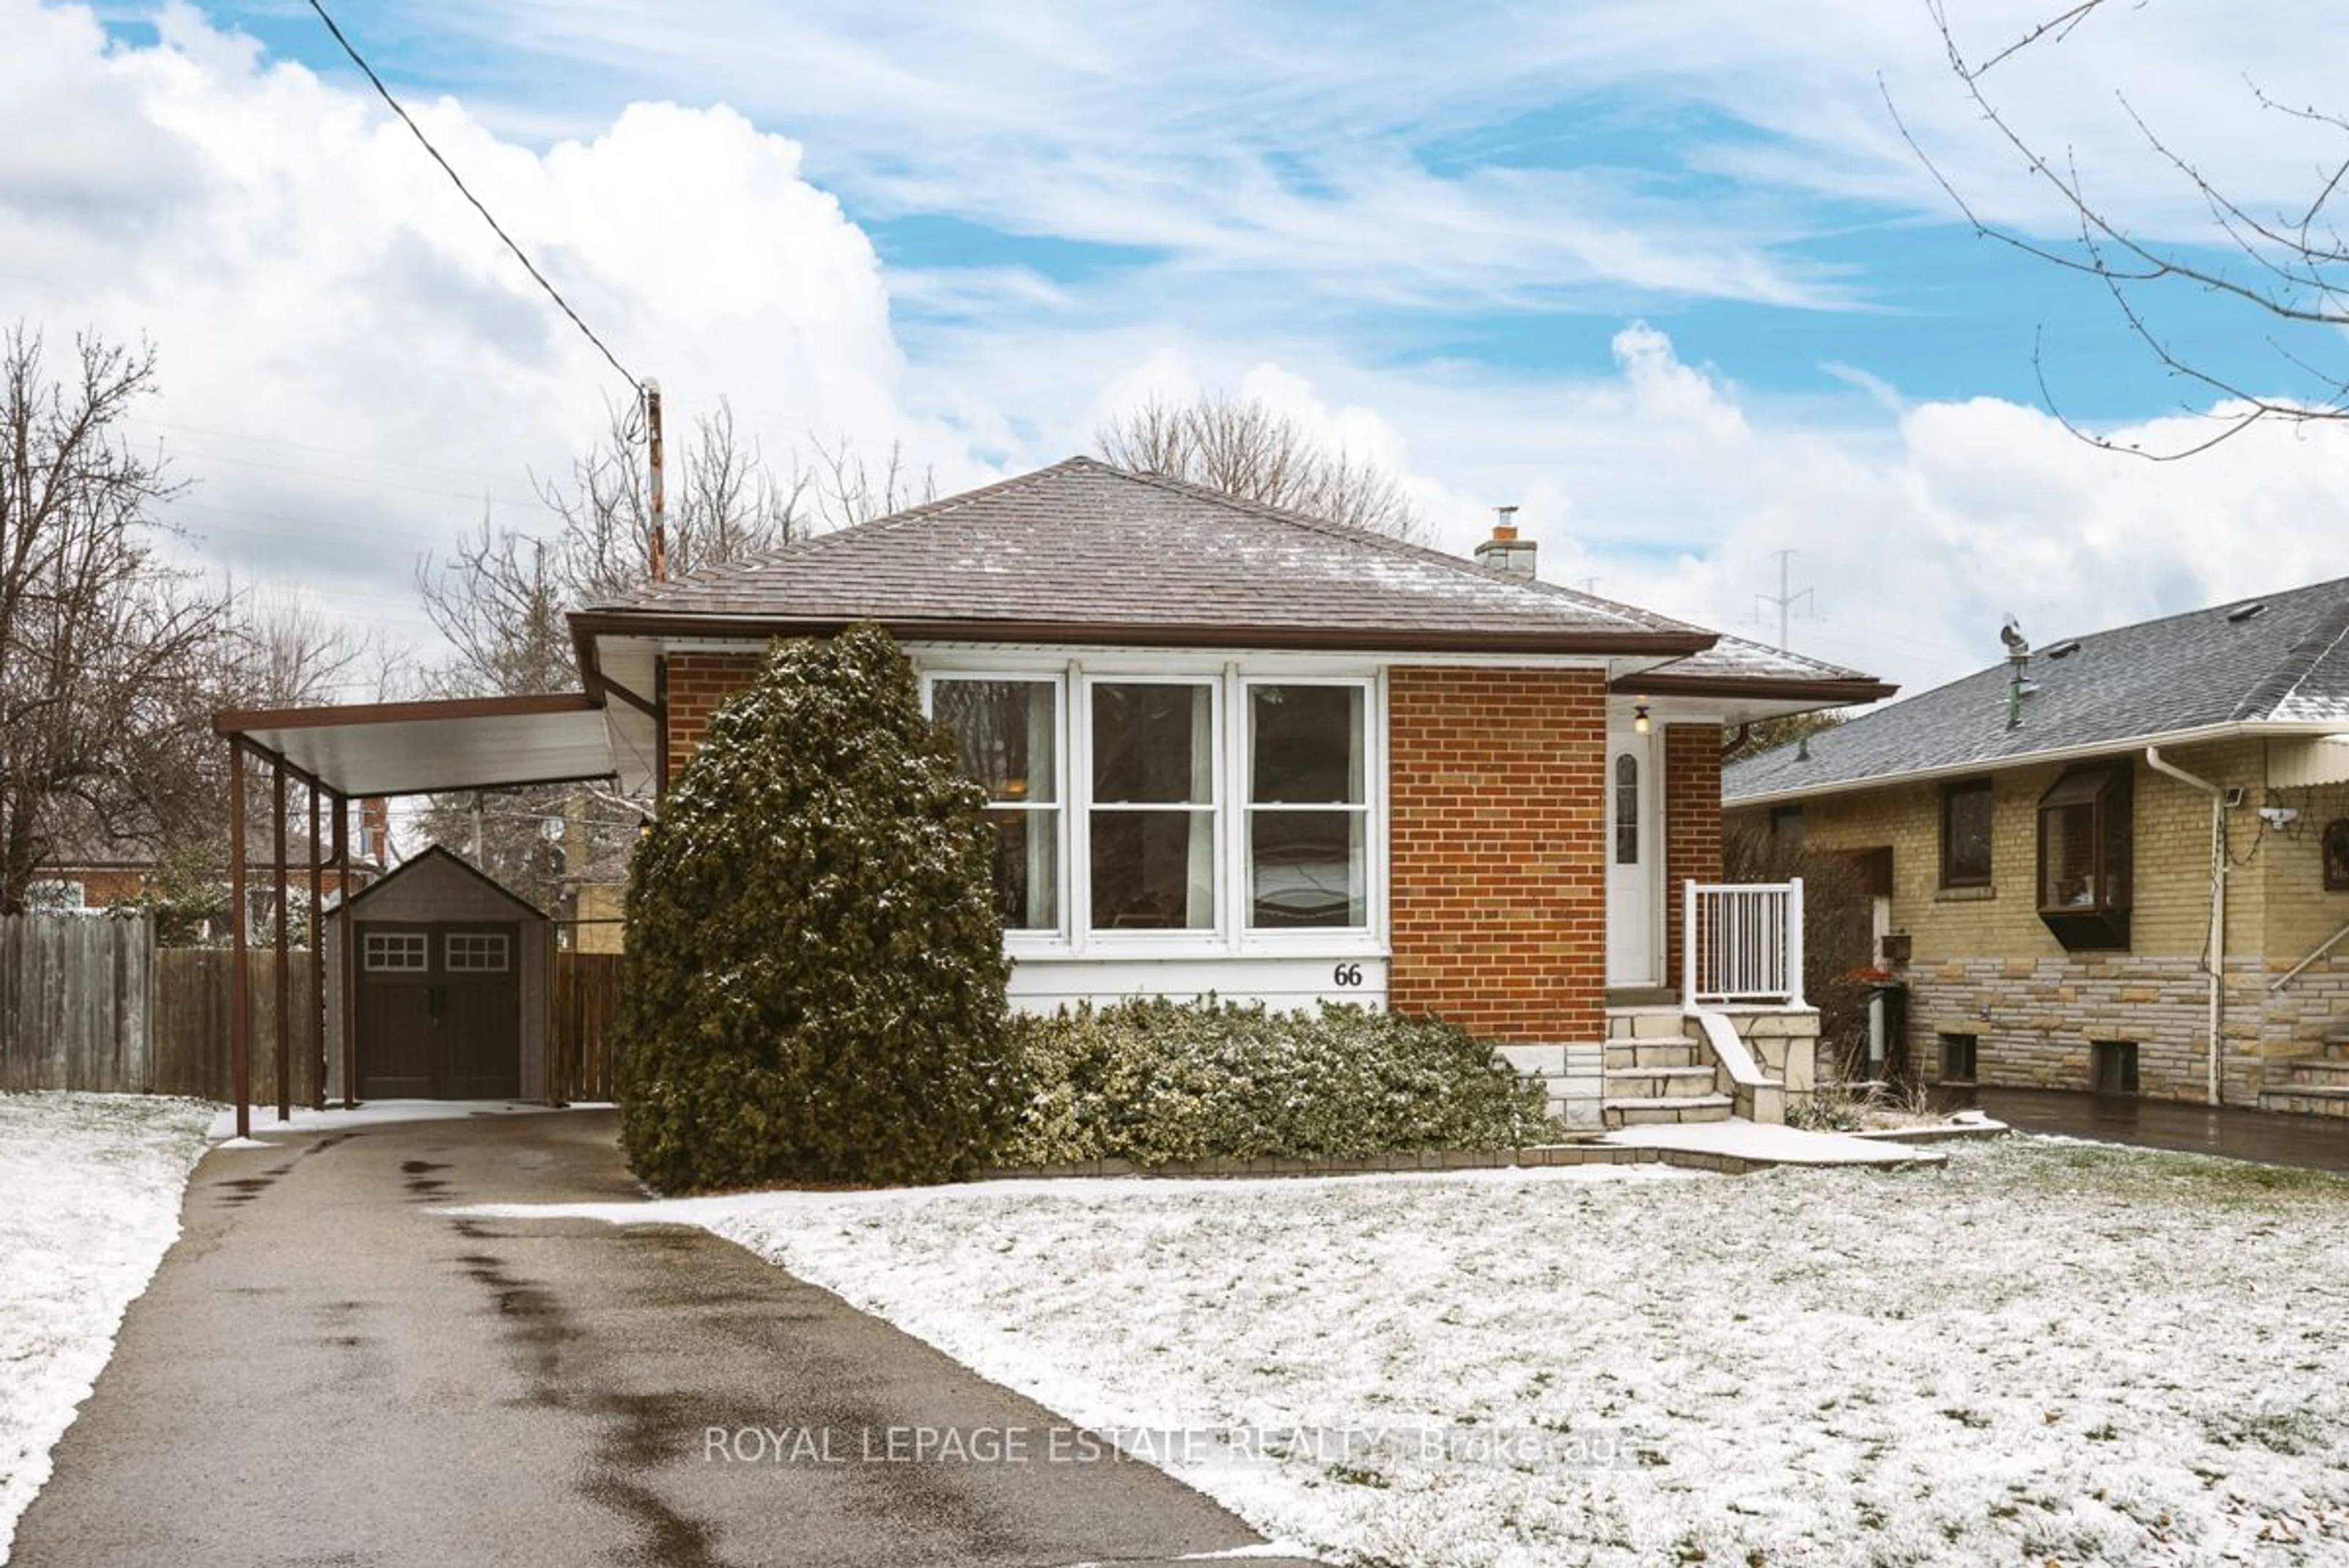 Home with brick exterior material for 66 Wantanopa Cres, Toronto Ontario M1H 2B4